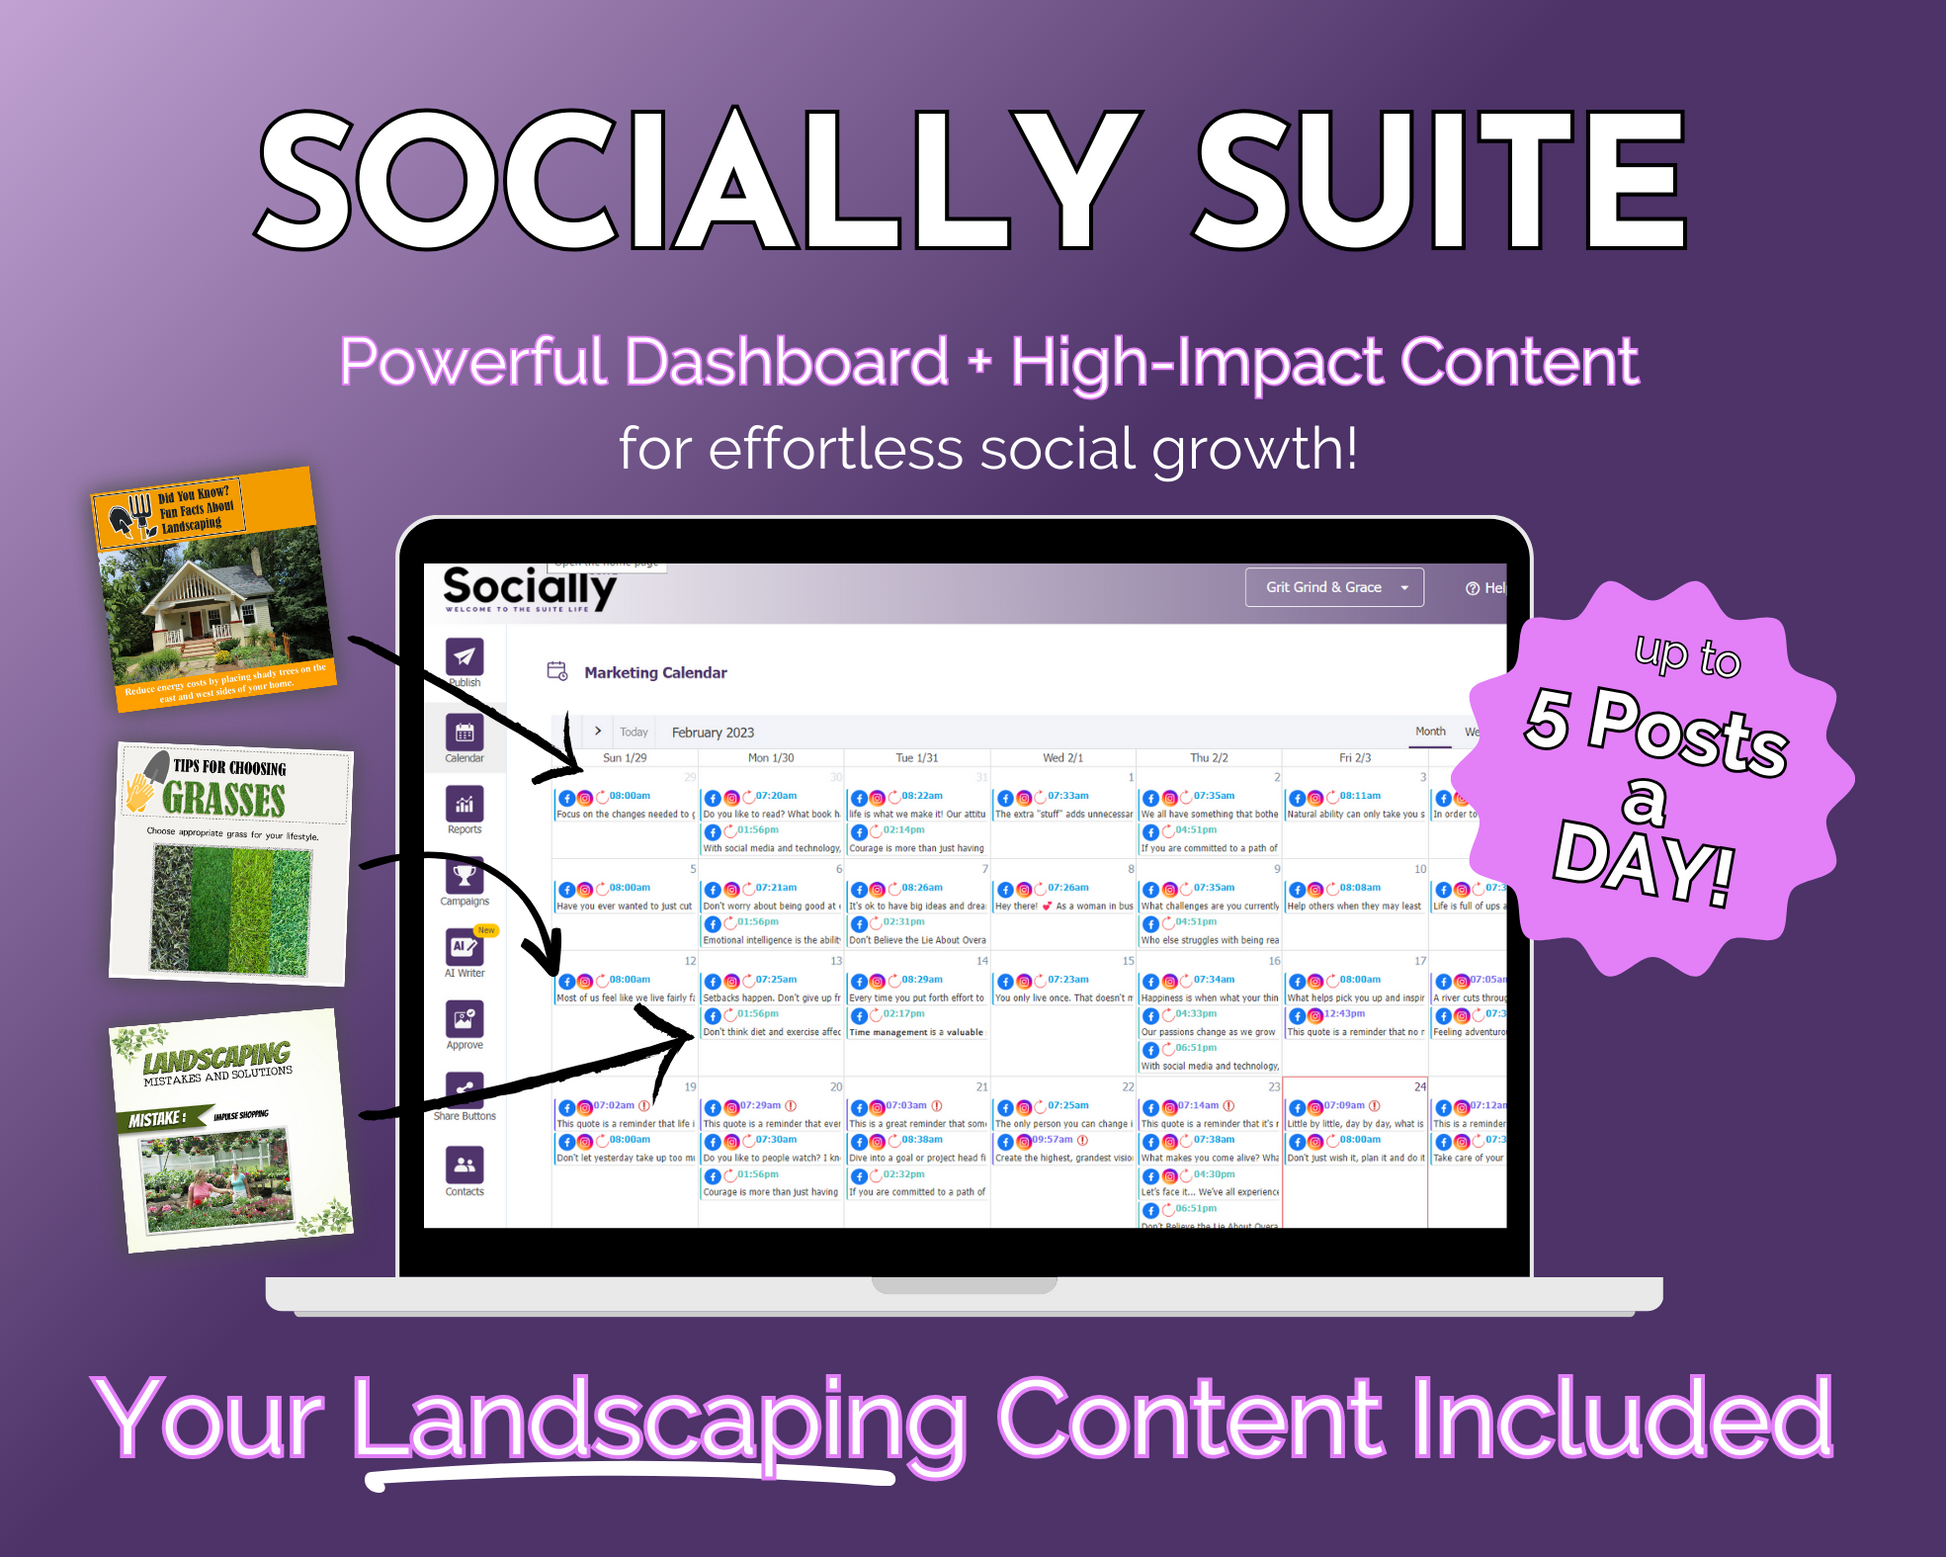 The Get Socially Inclined Socially Suite Membership is a powerful dashboard that includes high content and helps manage your landscaping content for a strong online presence.